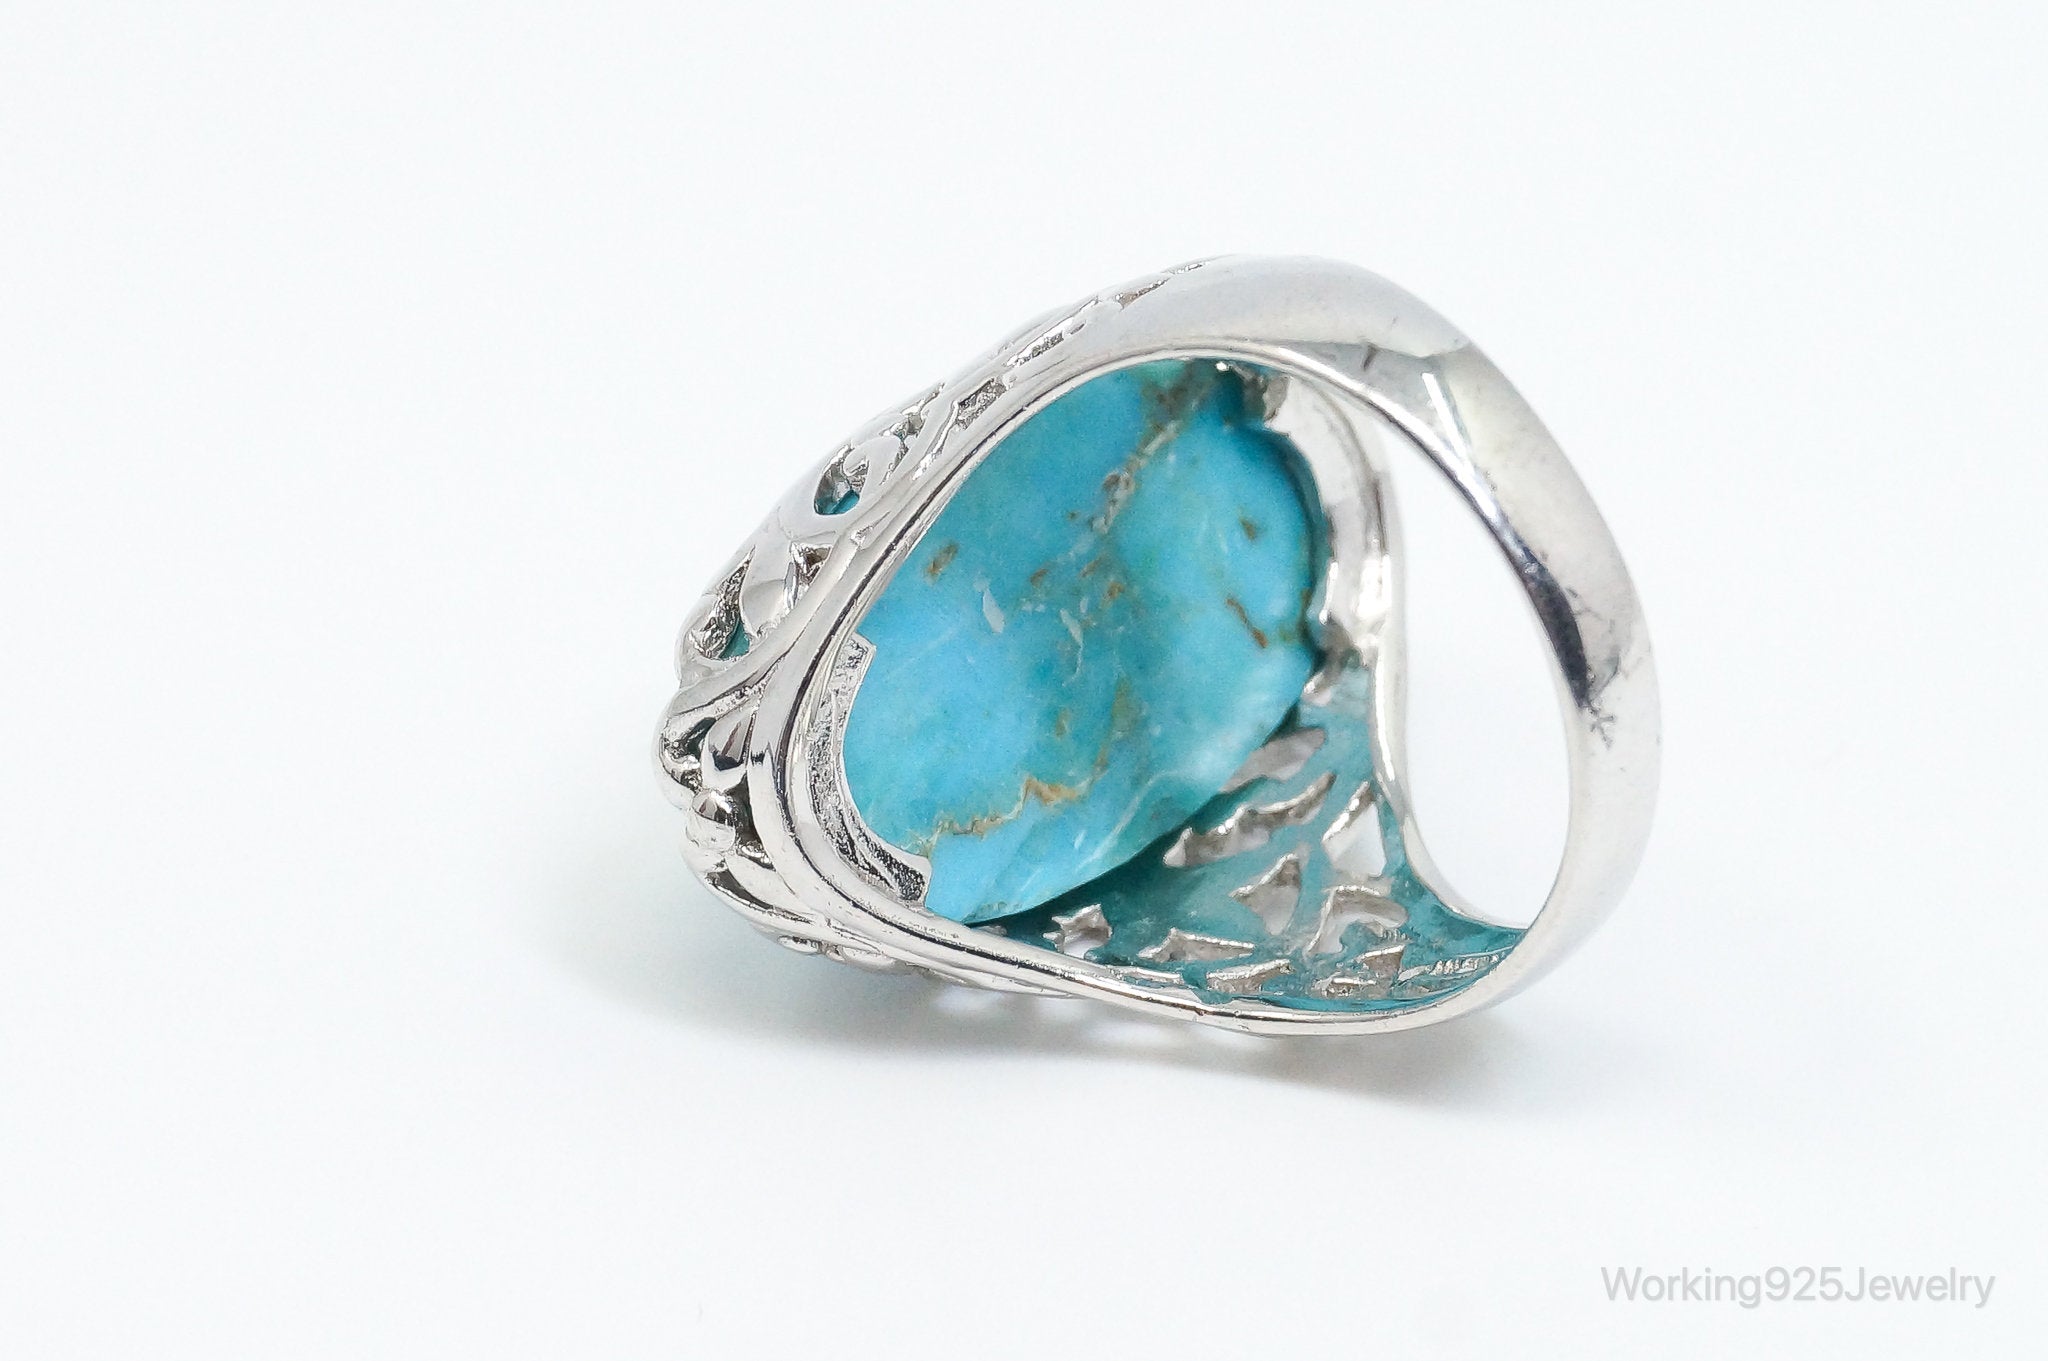 Designer Chapal-Zenray Large Turquoise Sterling Silver Ring - Size 8